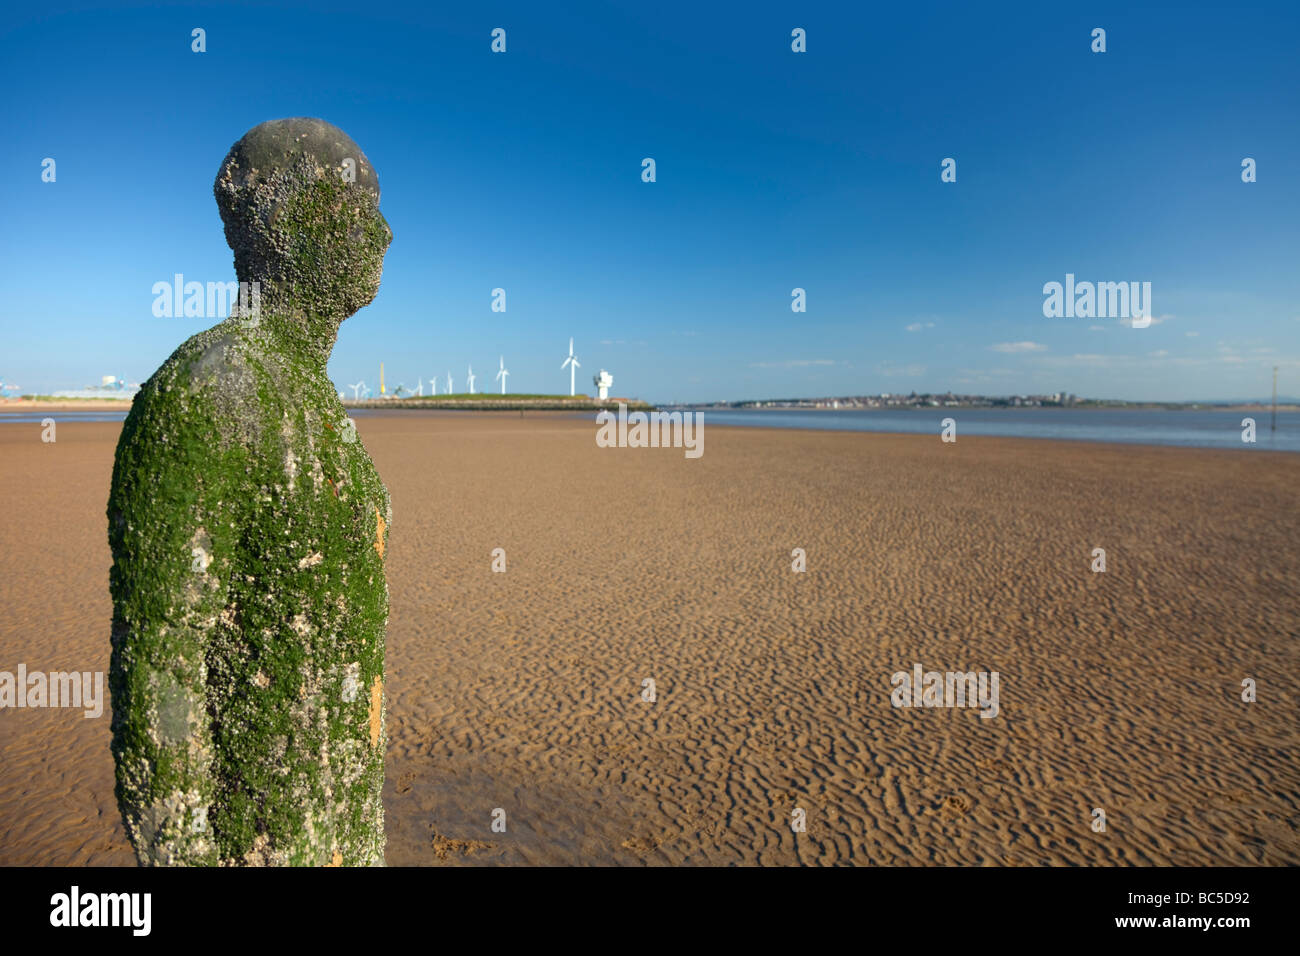 Sir Antony Gormley artwork Another Place is located on Crosby Beach which forms part of the Sefton Coast, within the Liverpool City Region of the UK. Stock Photo